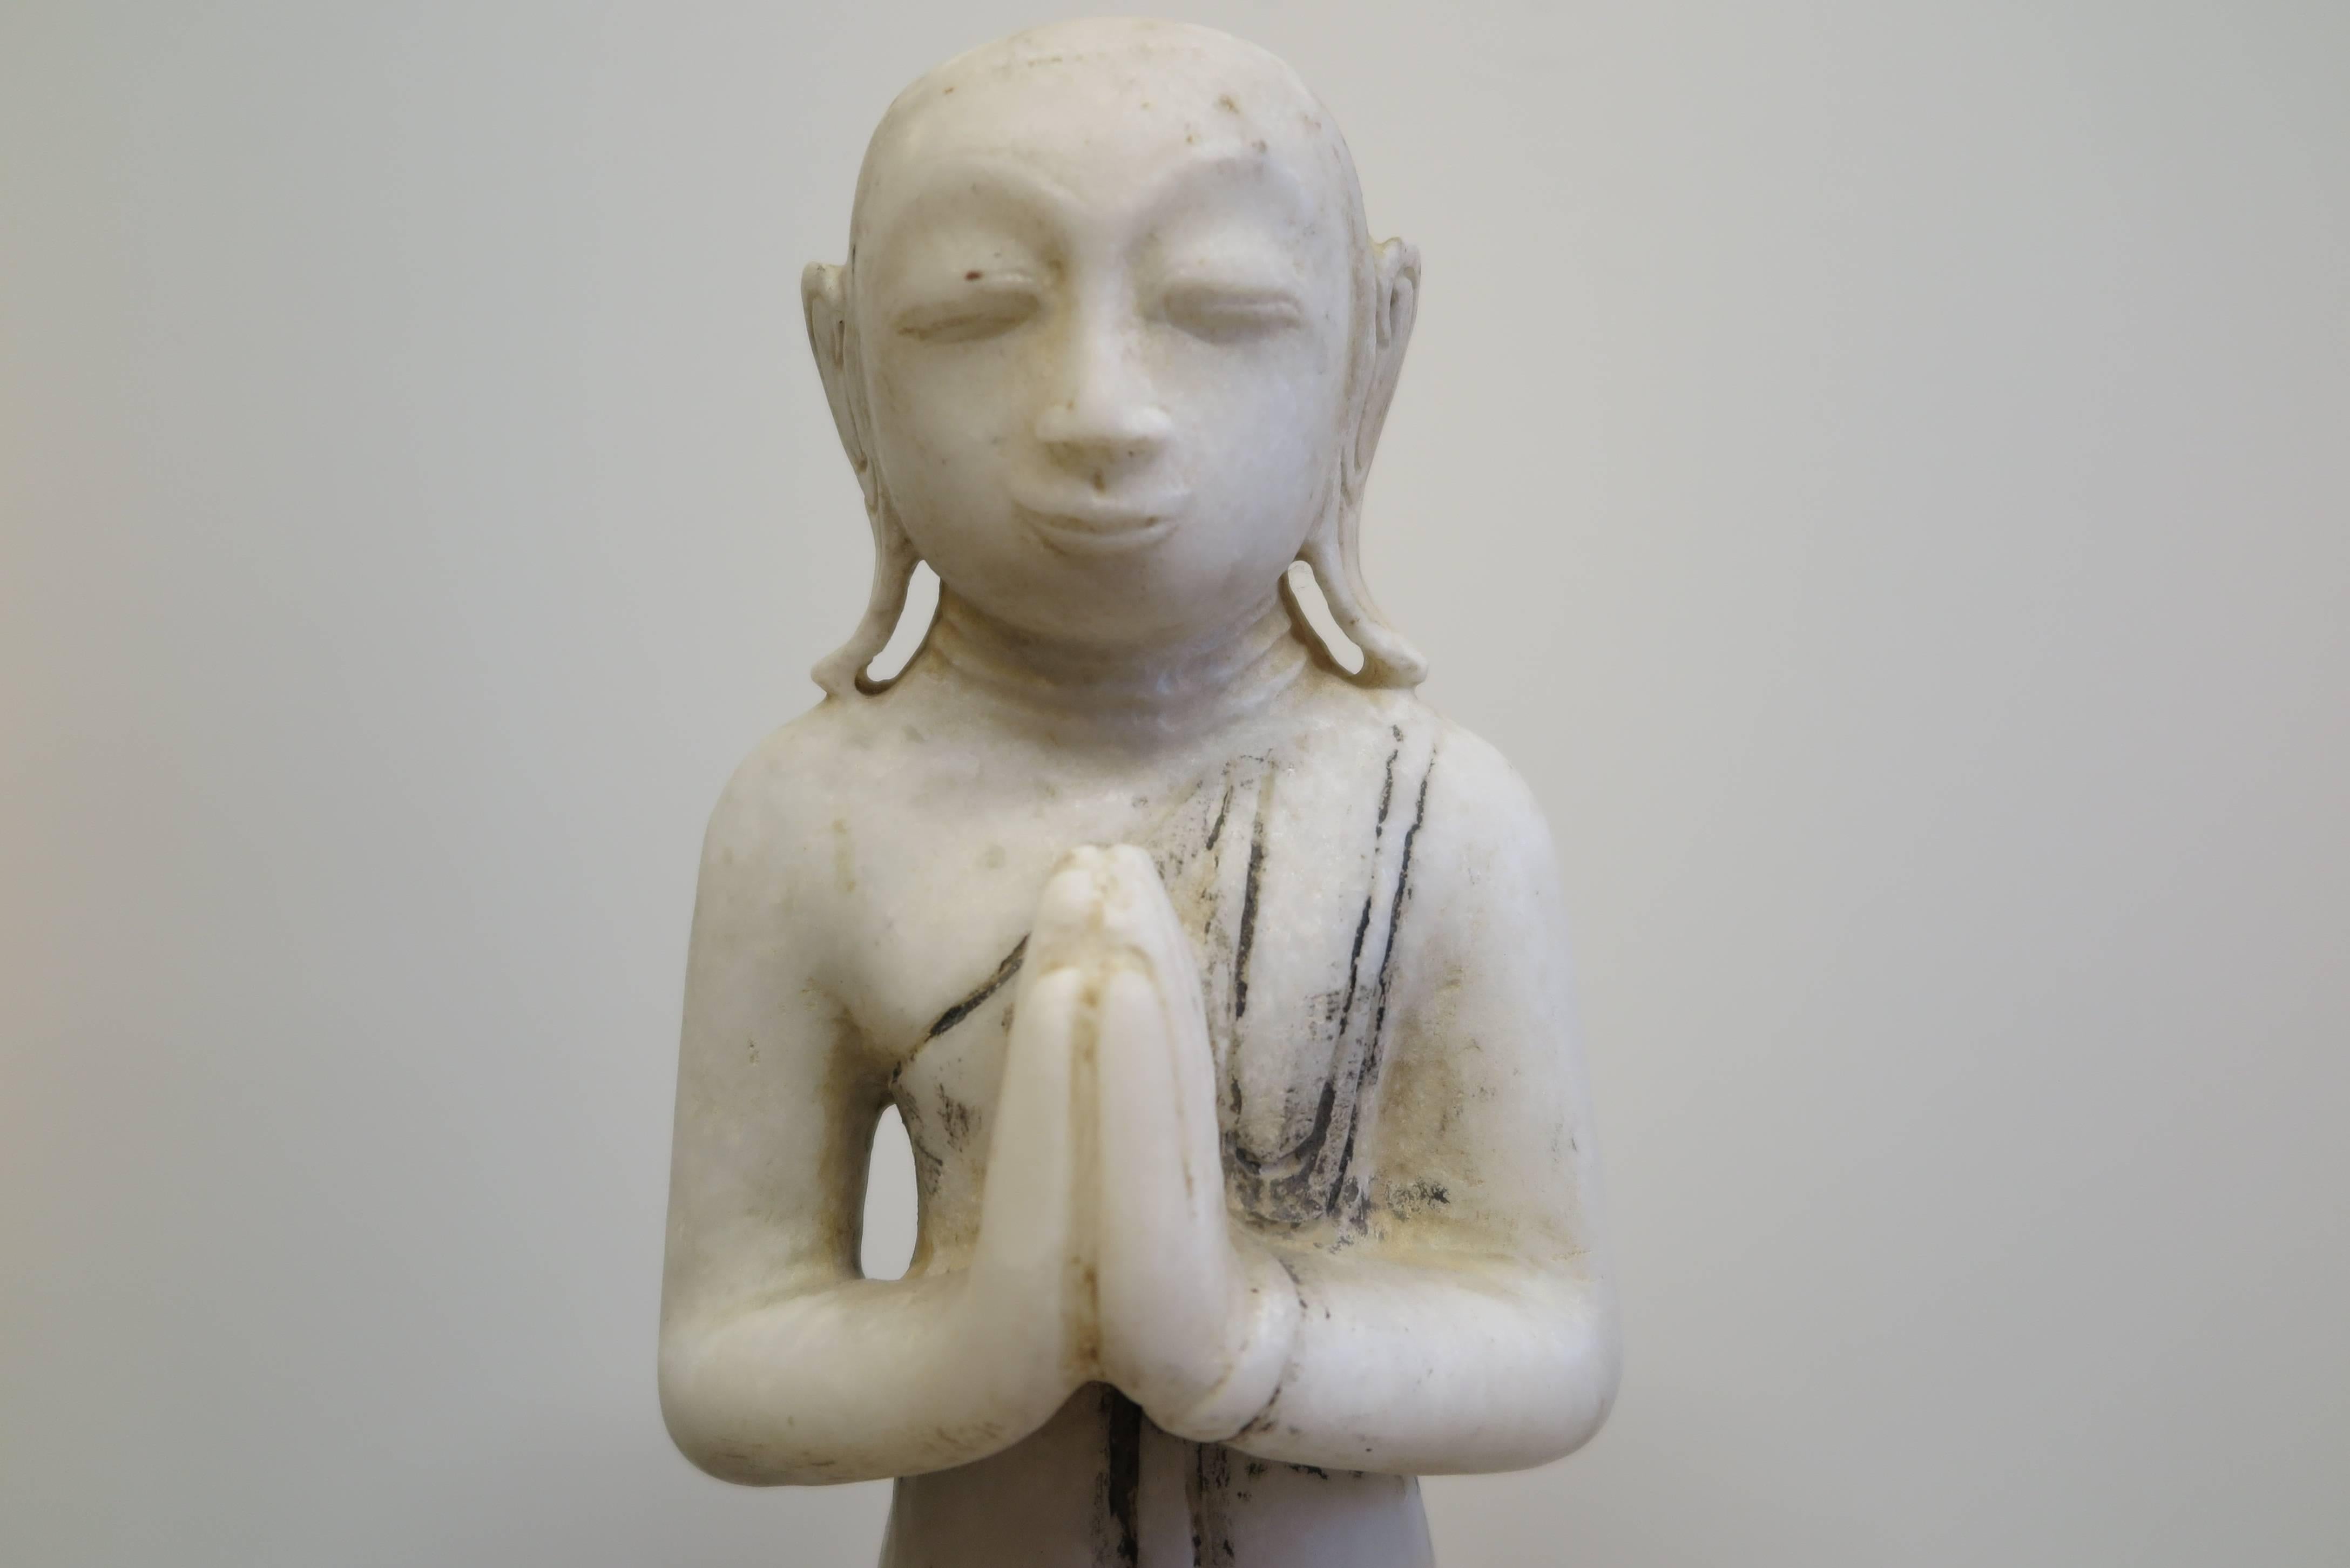 A Burmese Alabaster sculpture of a Buddhist Monk devotee, Buddha. This posture is called Namaskara mudra, or Anjali mudra and is the gesture of greeting, prayer, adoration, and is also associated with thankfulness. The carving is subtle and refined